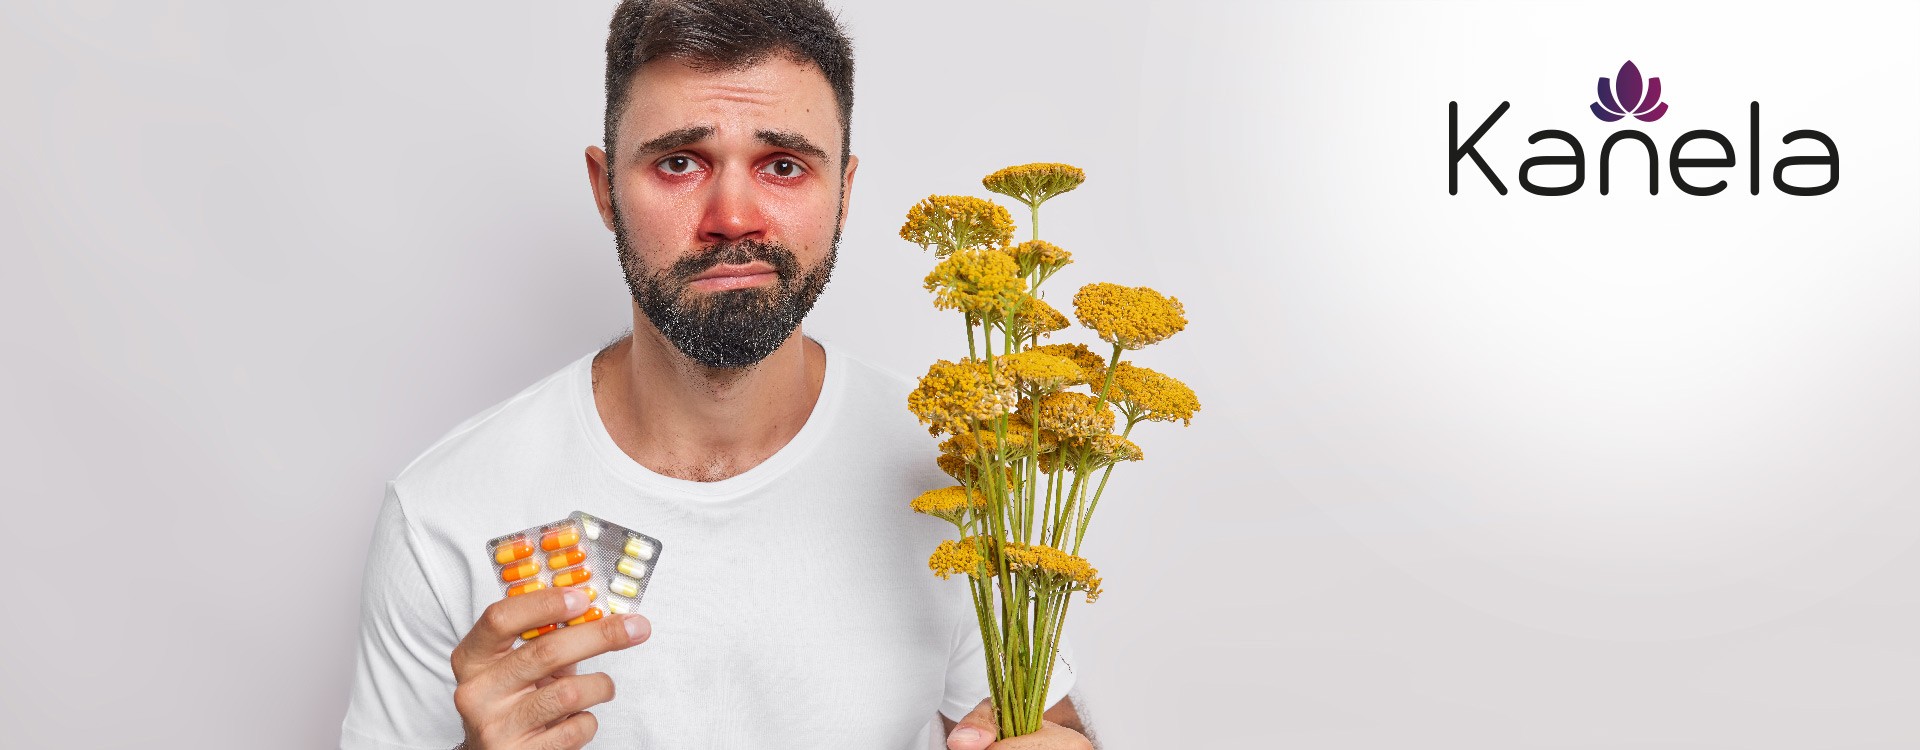 Home remedies for hay fever – which ones really help?